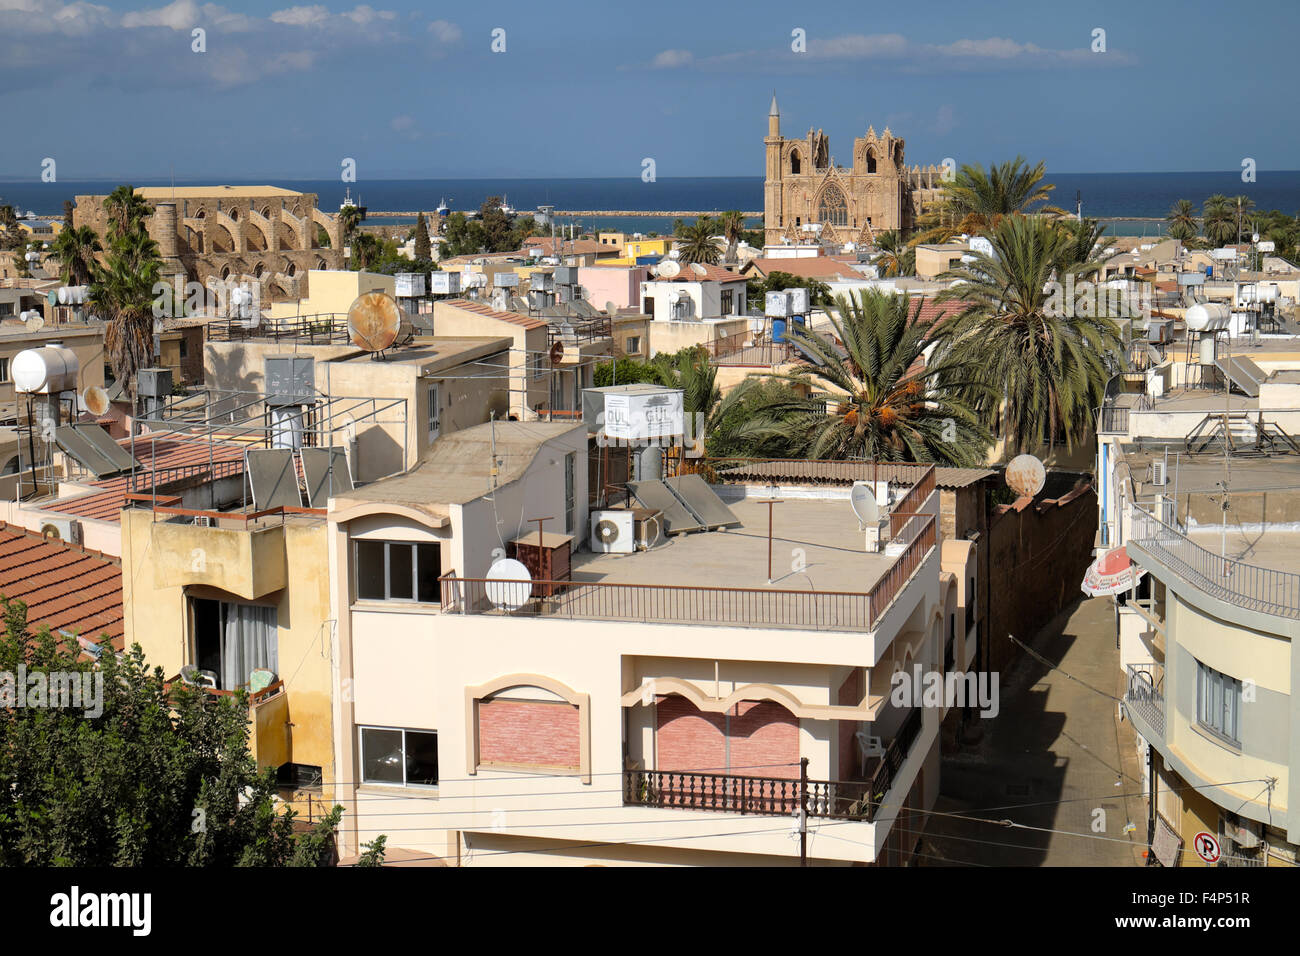 A view looking towards the mosque and sea over the town of Famagusta in Turkish Northern Cyprus  KATHY DEWITT Stock Photo